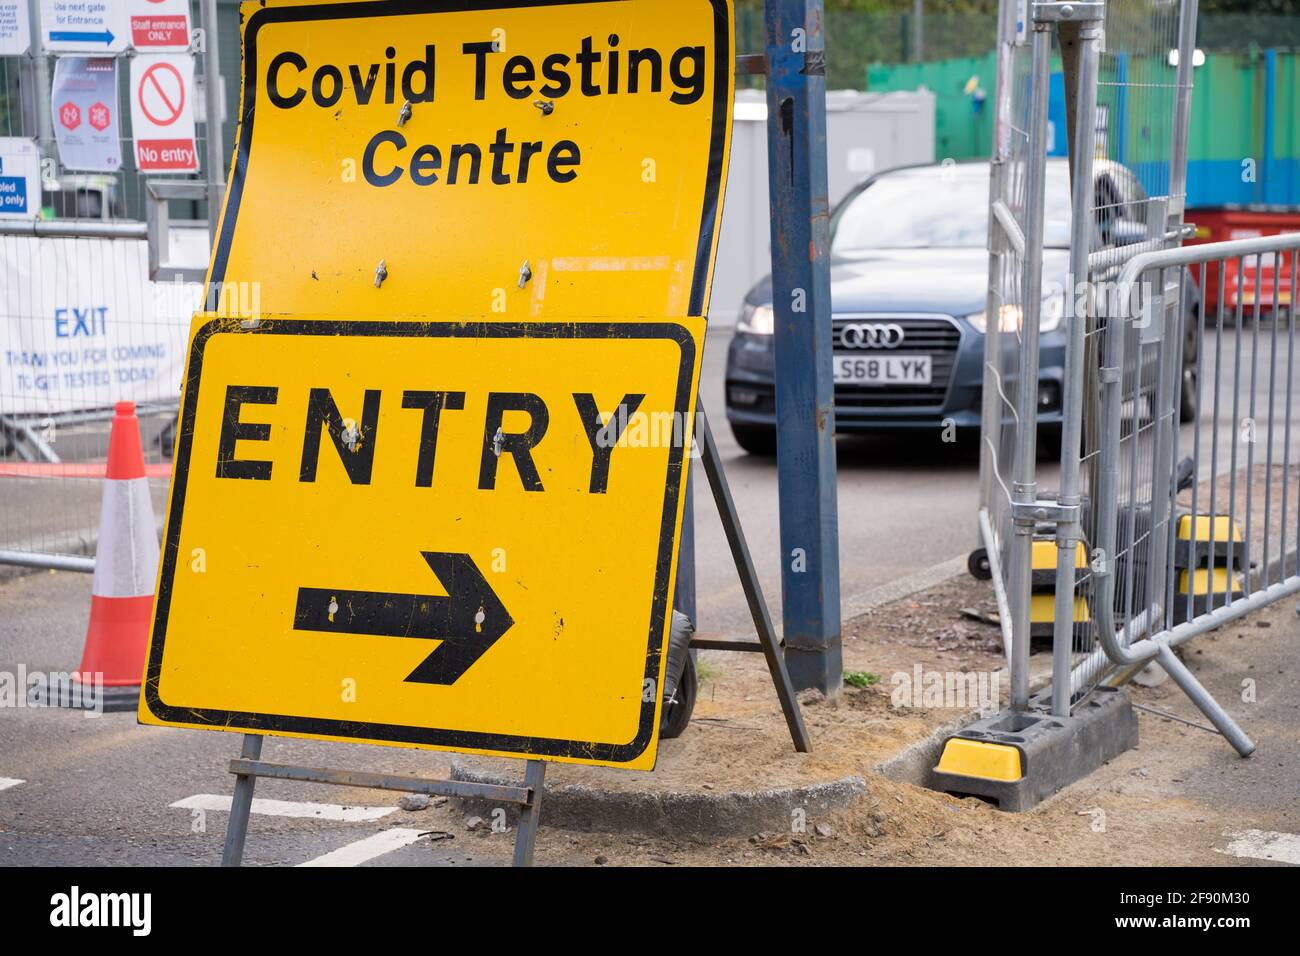 Entrance sign of Covid Testing Centre Stock Photo